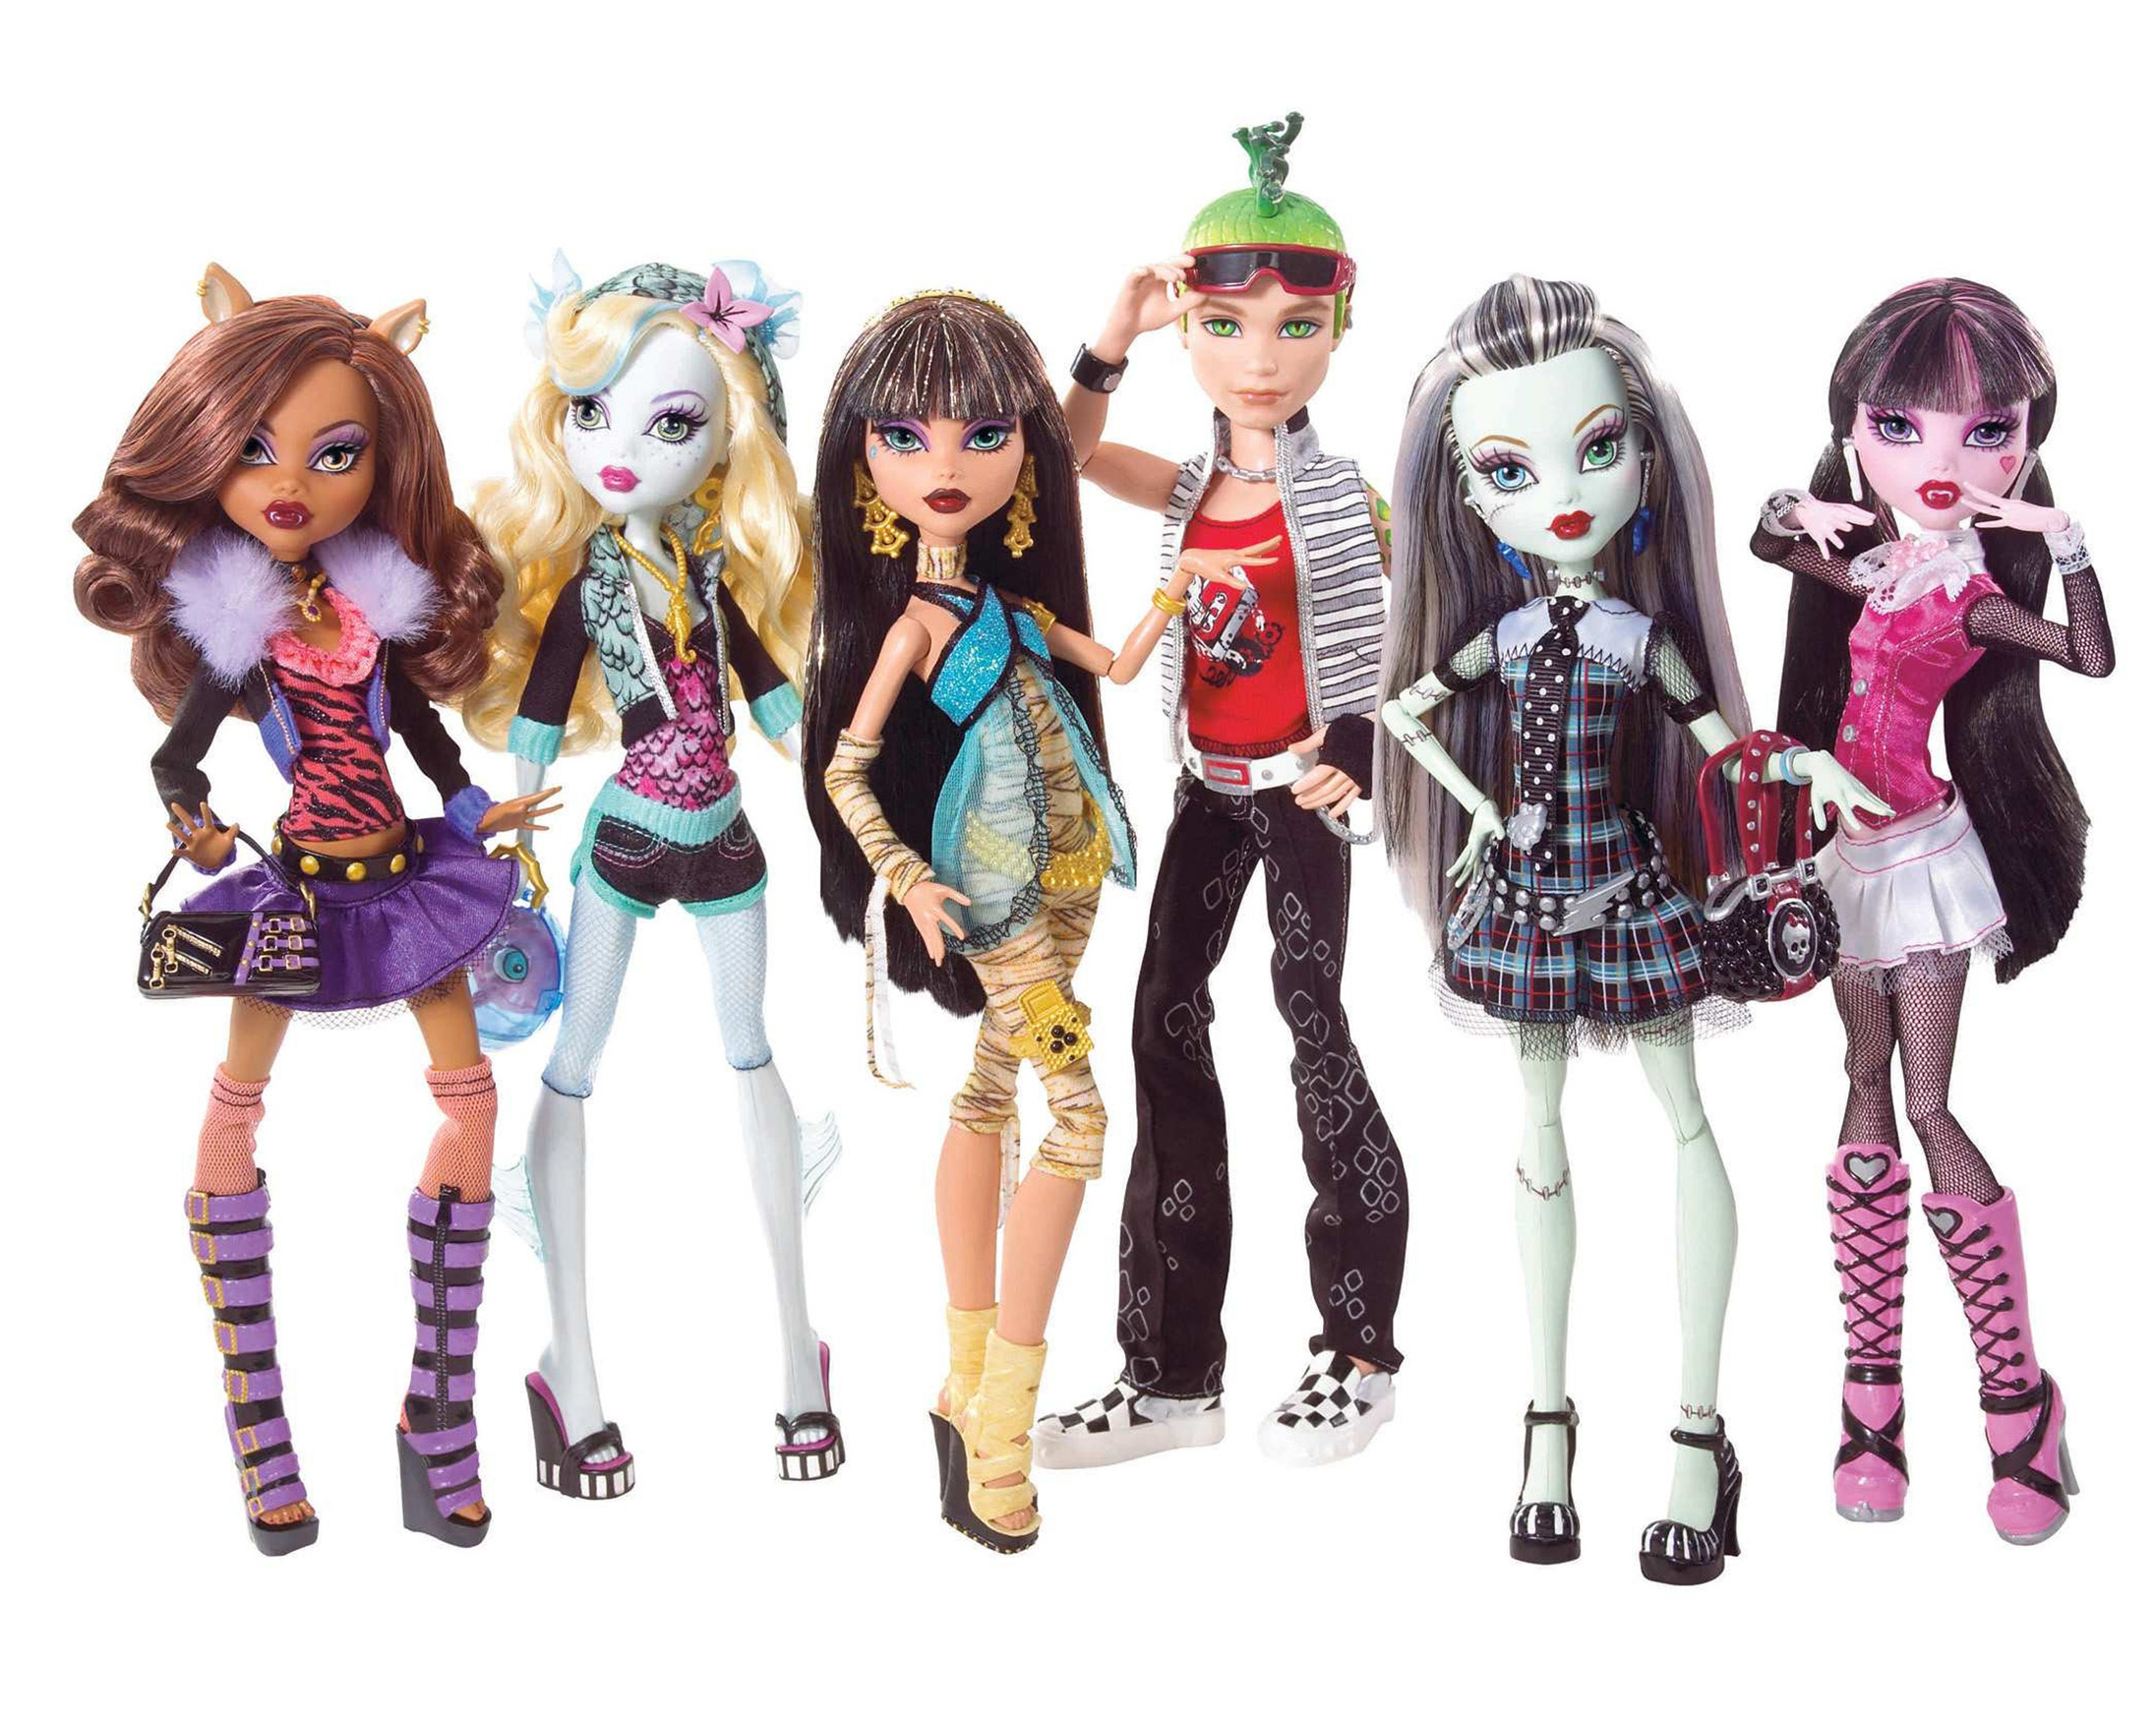 Mattel introduces some scary cute dolls